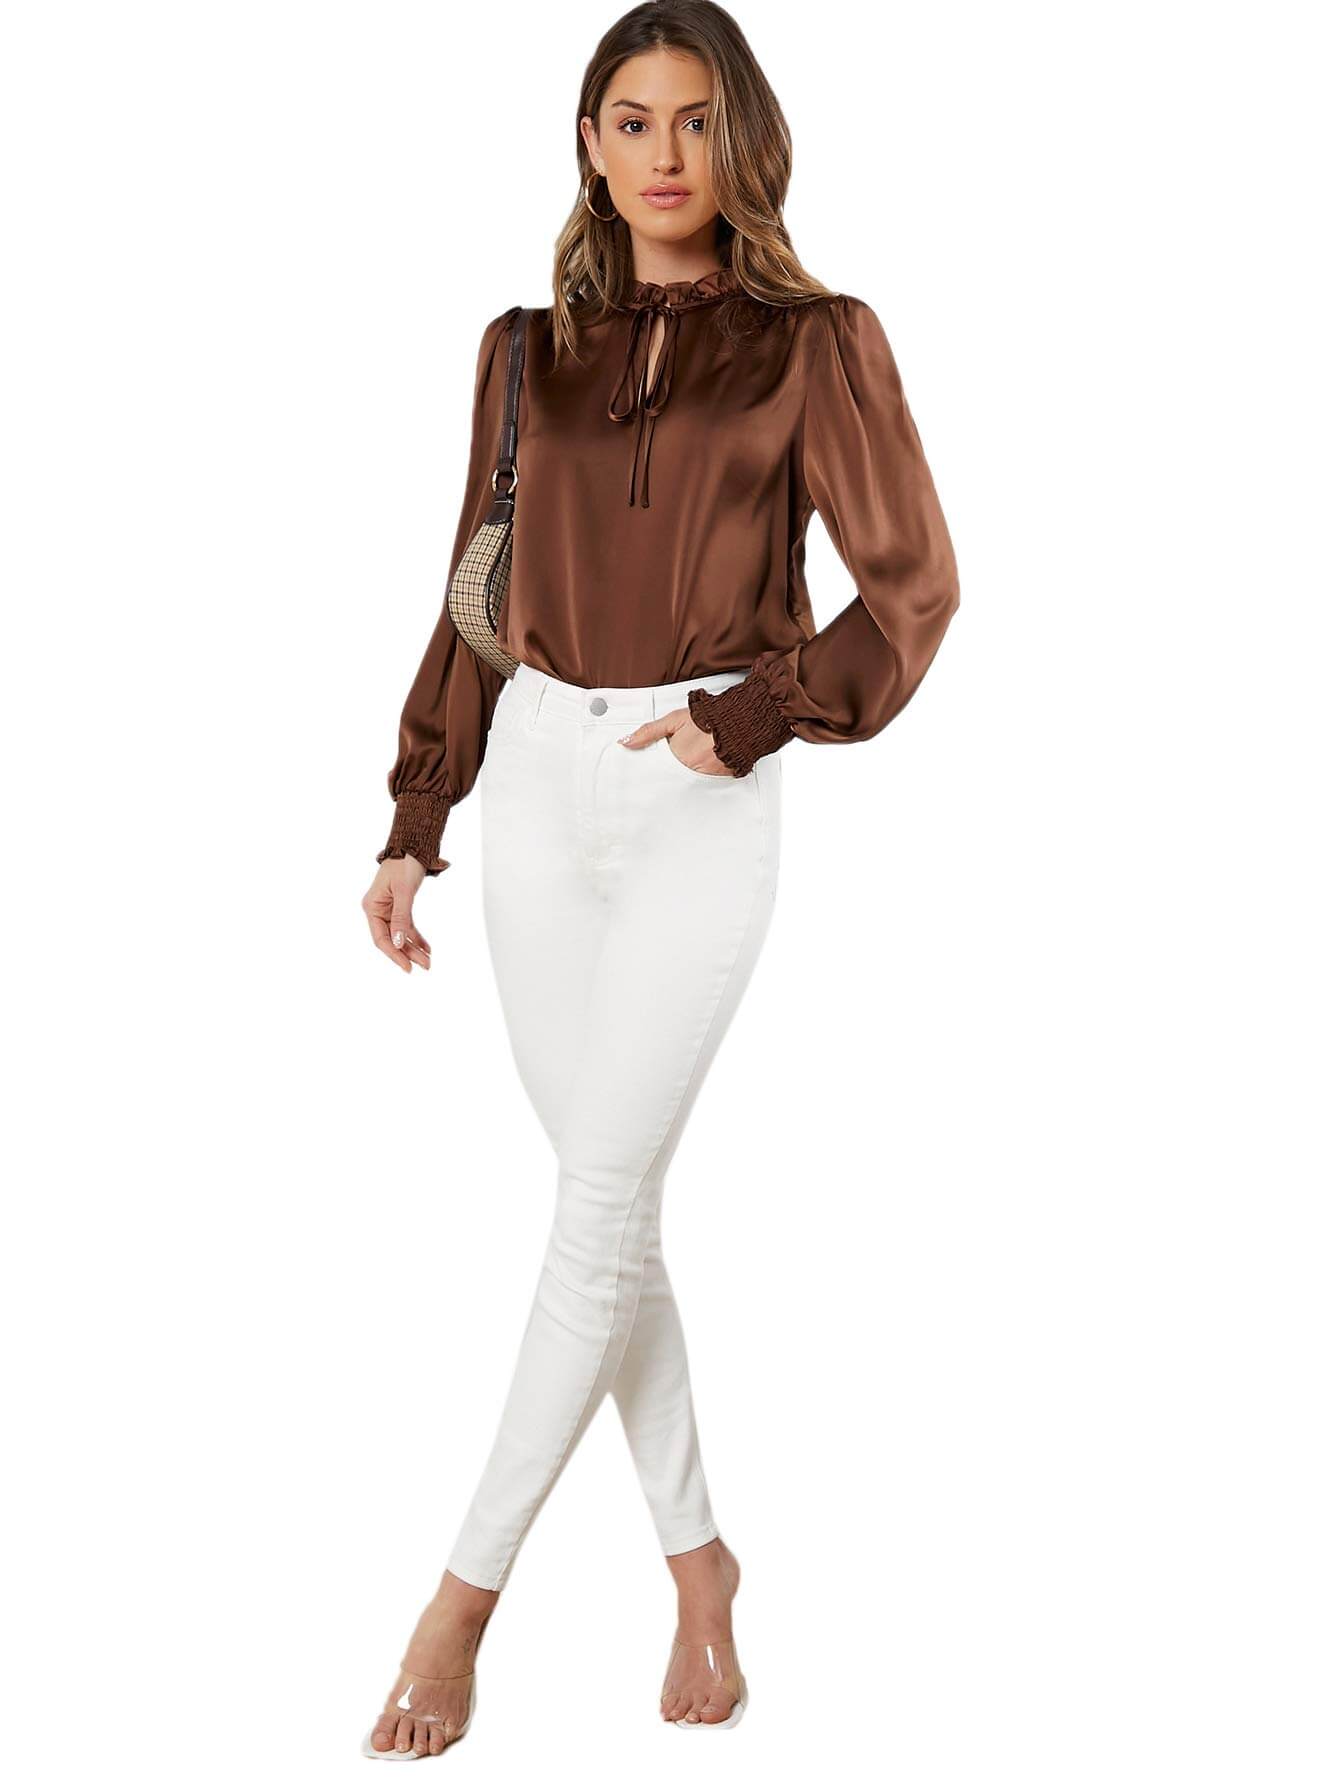 100% Pure Mulberry Button Front Long Sleeve Silk Blouse [SC020] - $99. ...